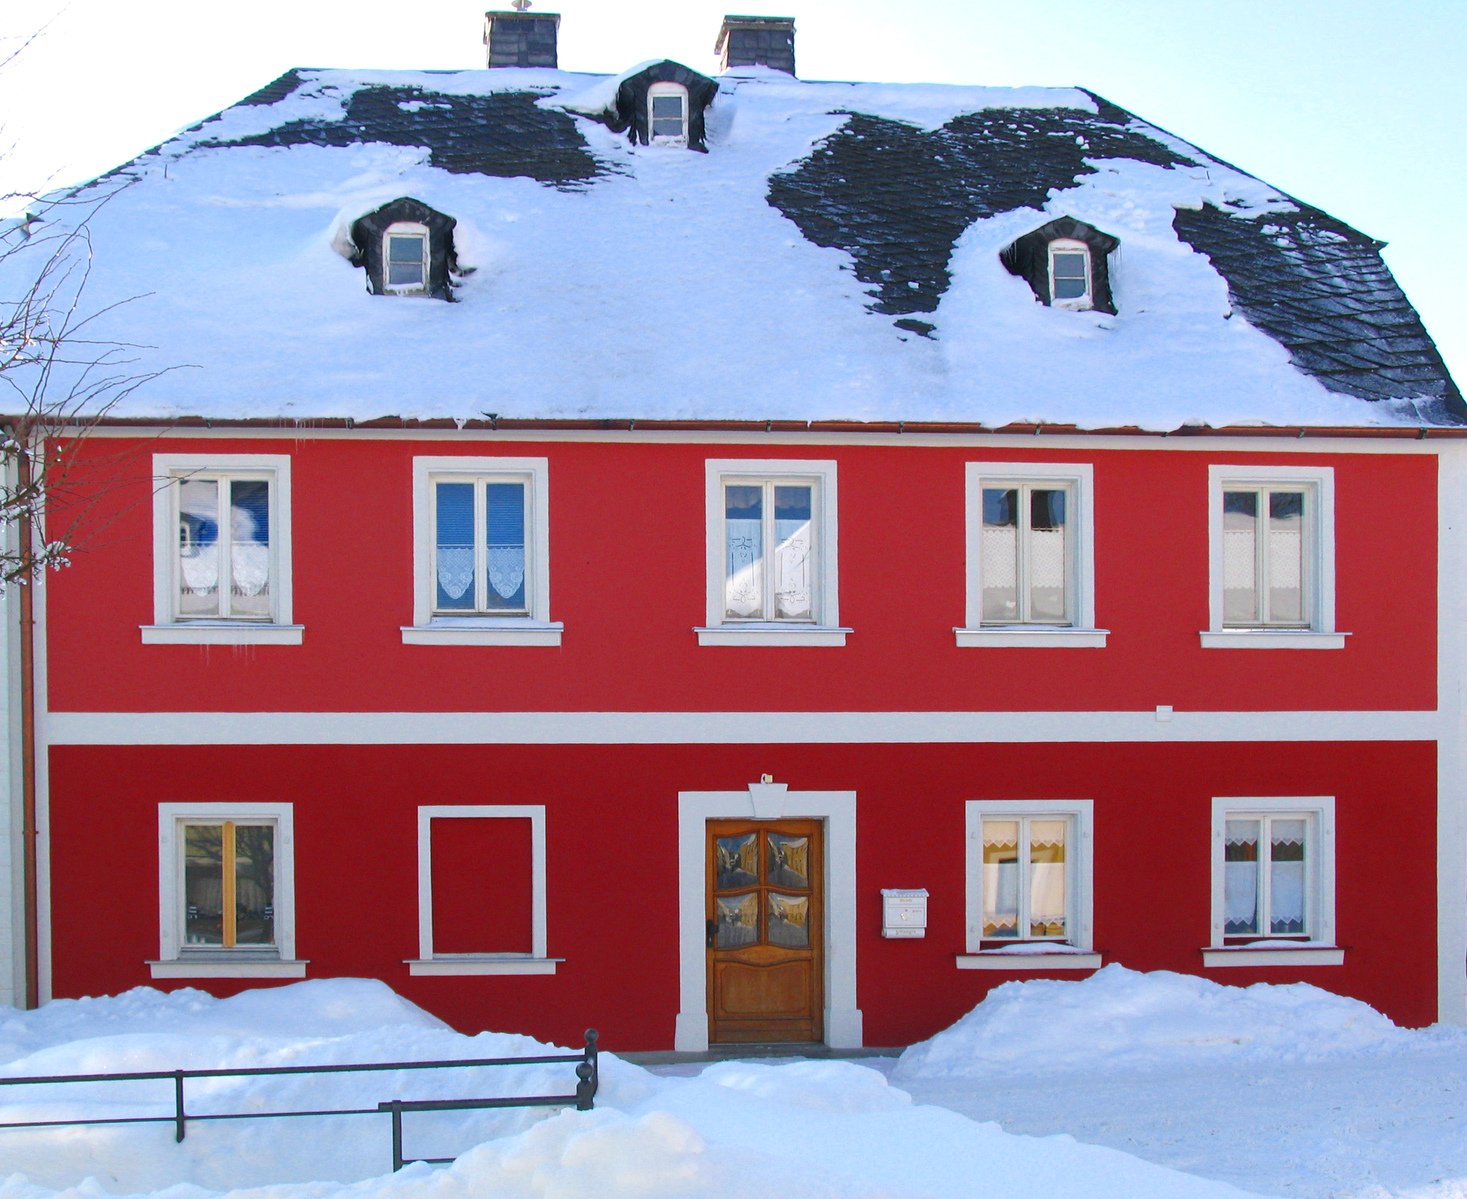 a red house with snow covering the ground